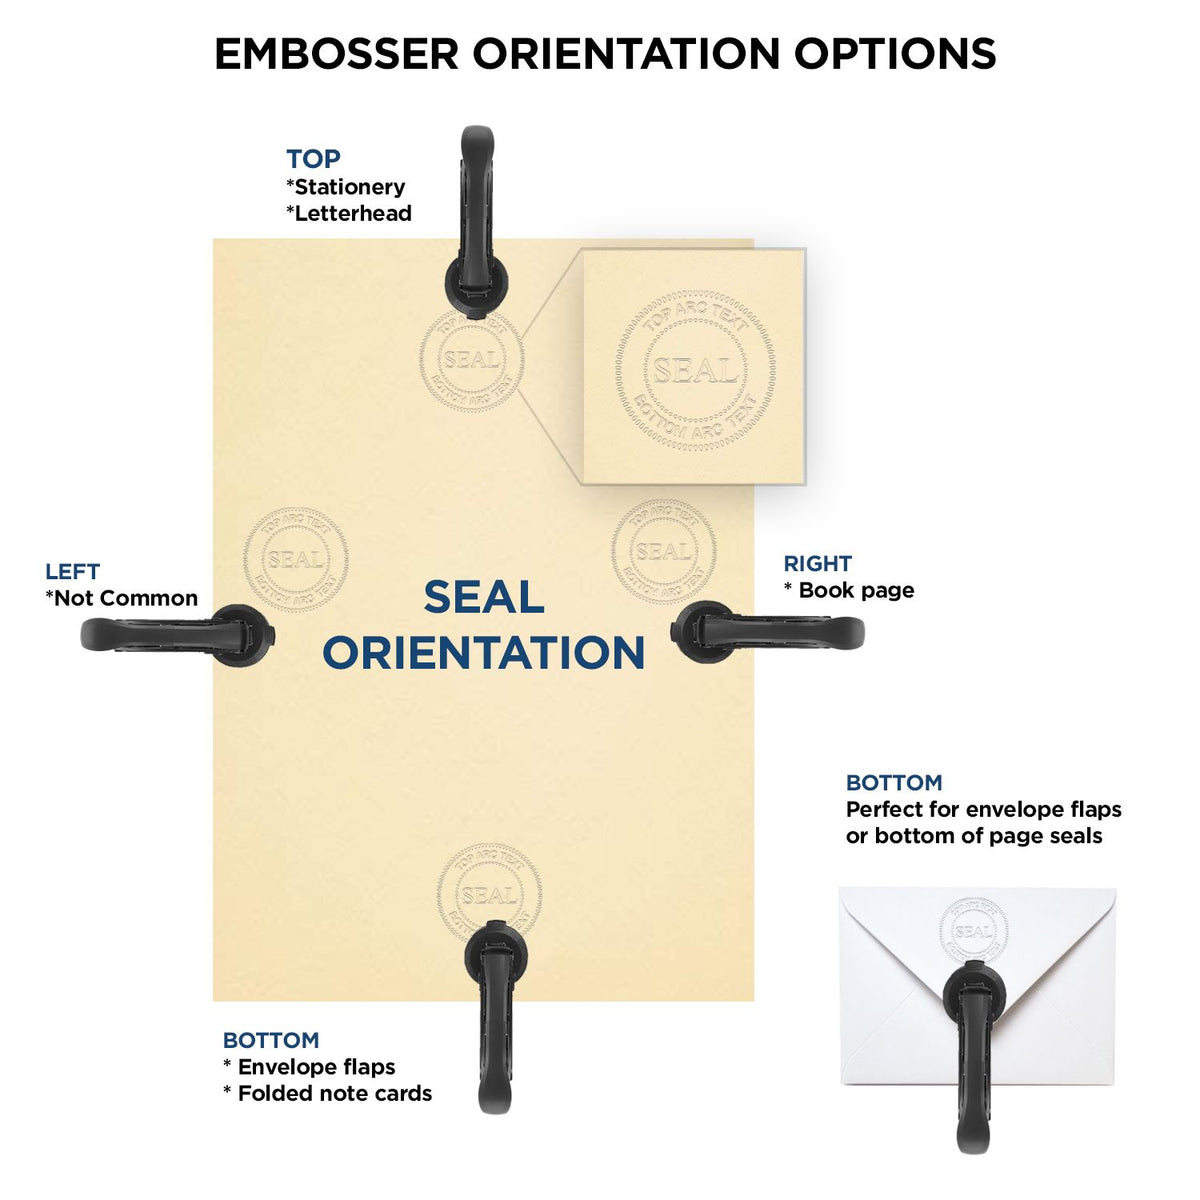 An infographic for the Handheld Idaho Architect Seal Embosser showing embosser orientation, this is showing examples of a top, bottom, right and left insert.